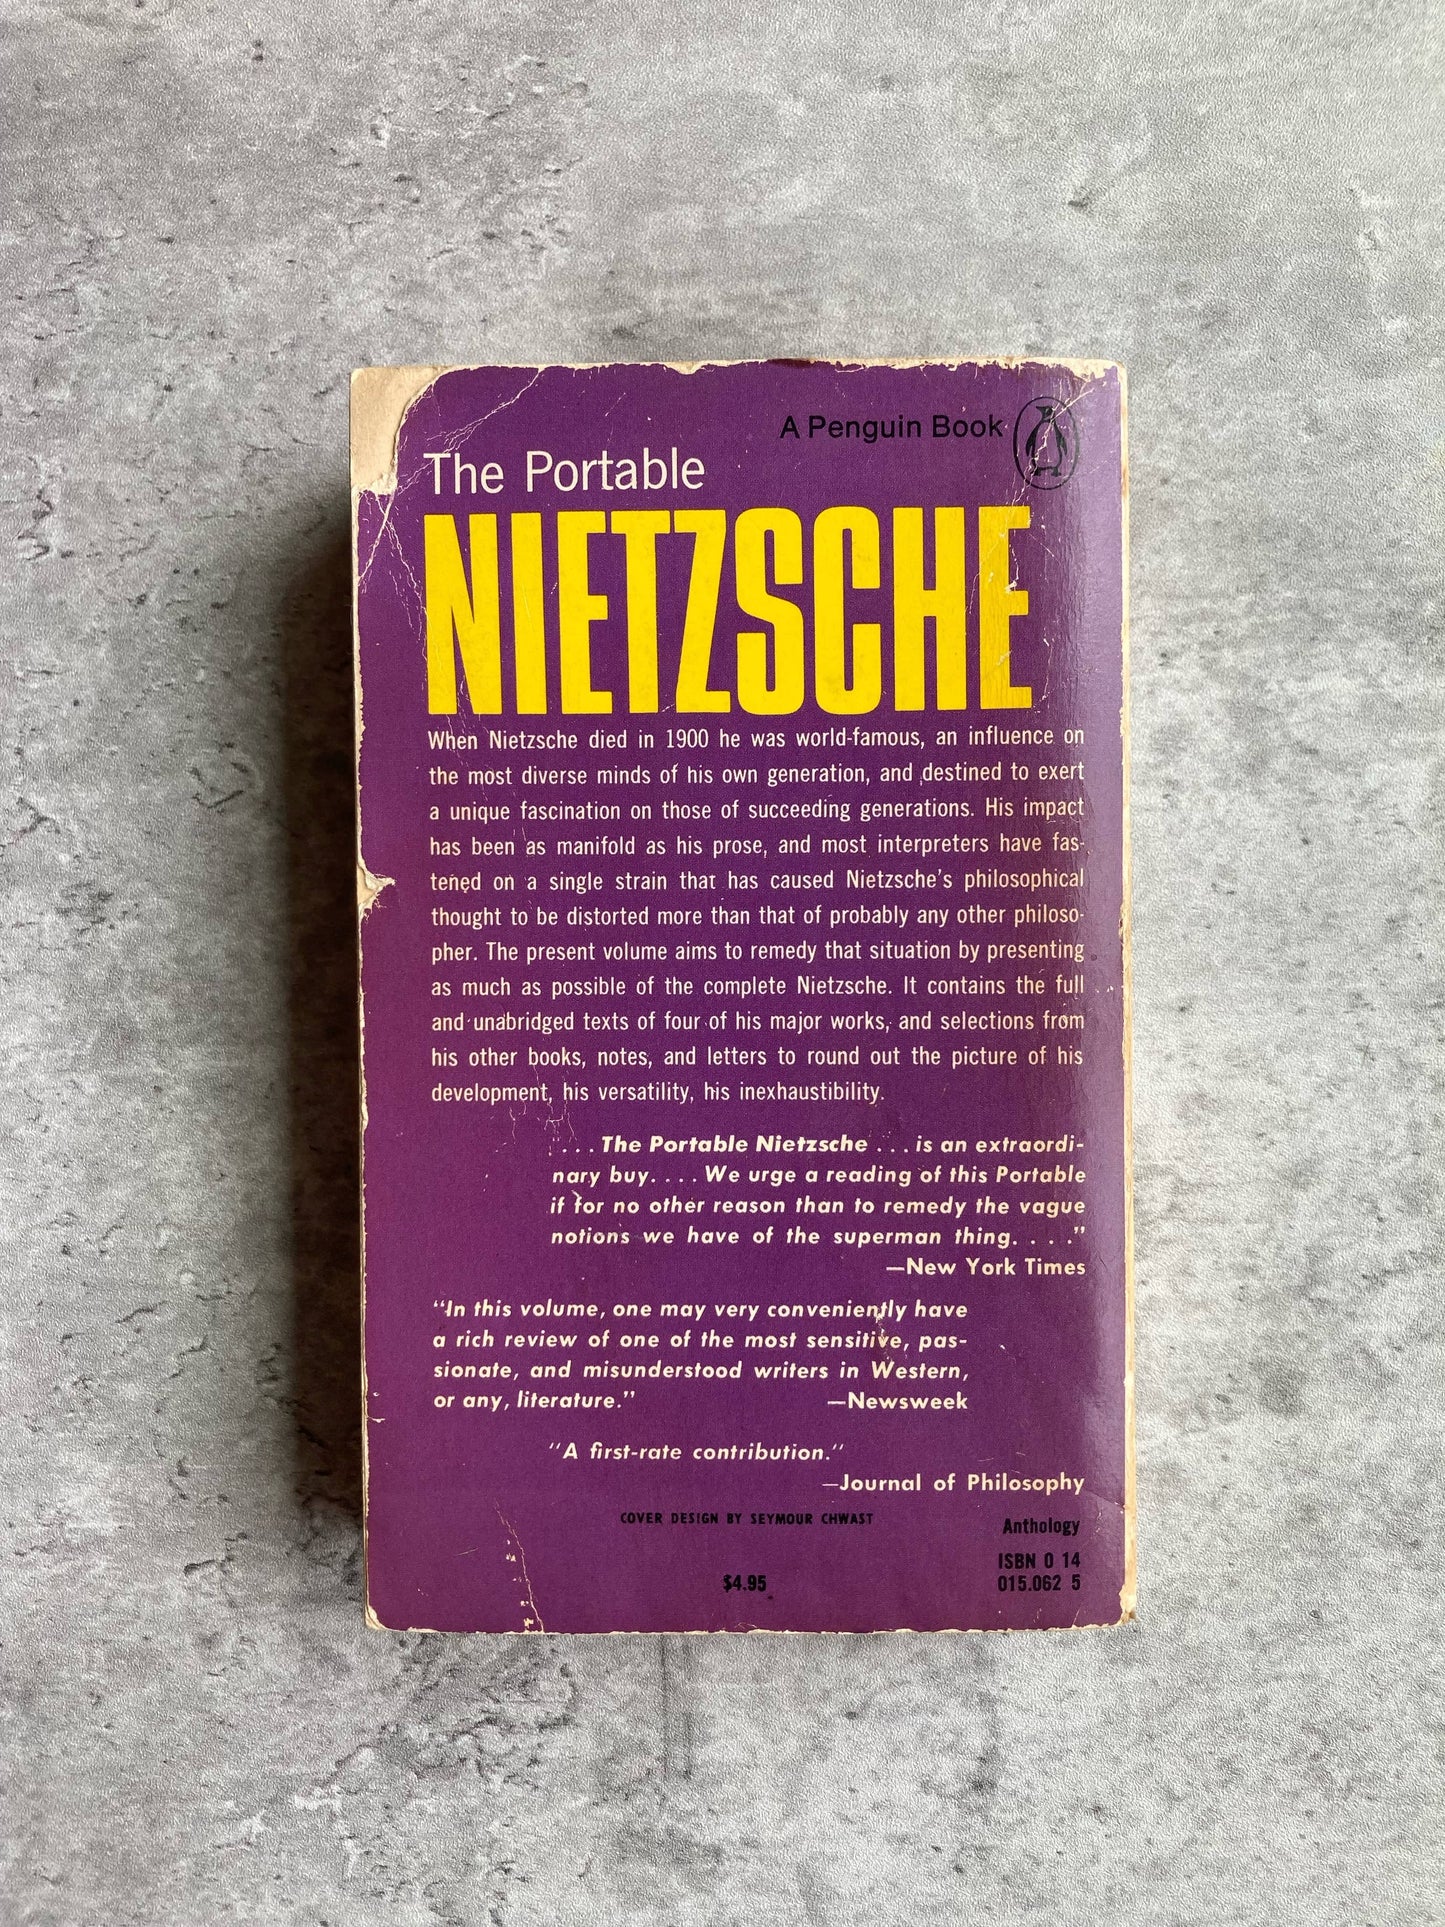 Cover of The Portable Nietzsche. Shop for books with The Stone Circle, the only online bookstore near you.